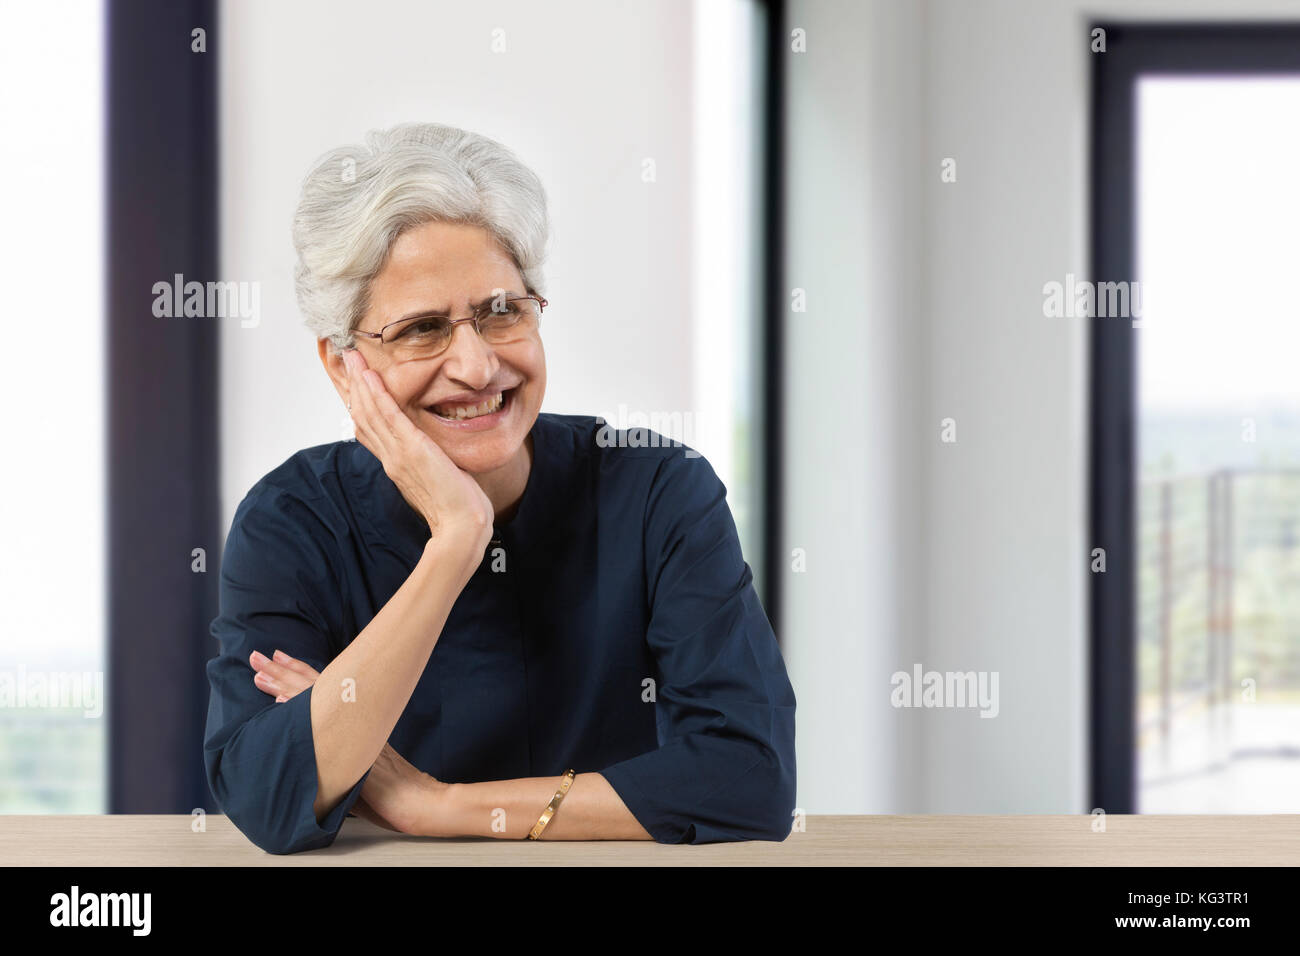 Happy senior woman with hand on chin looking away Banque D'Images